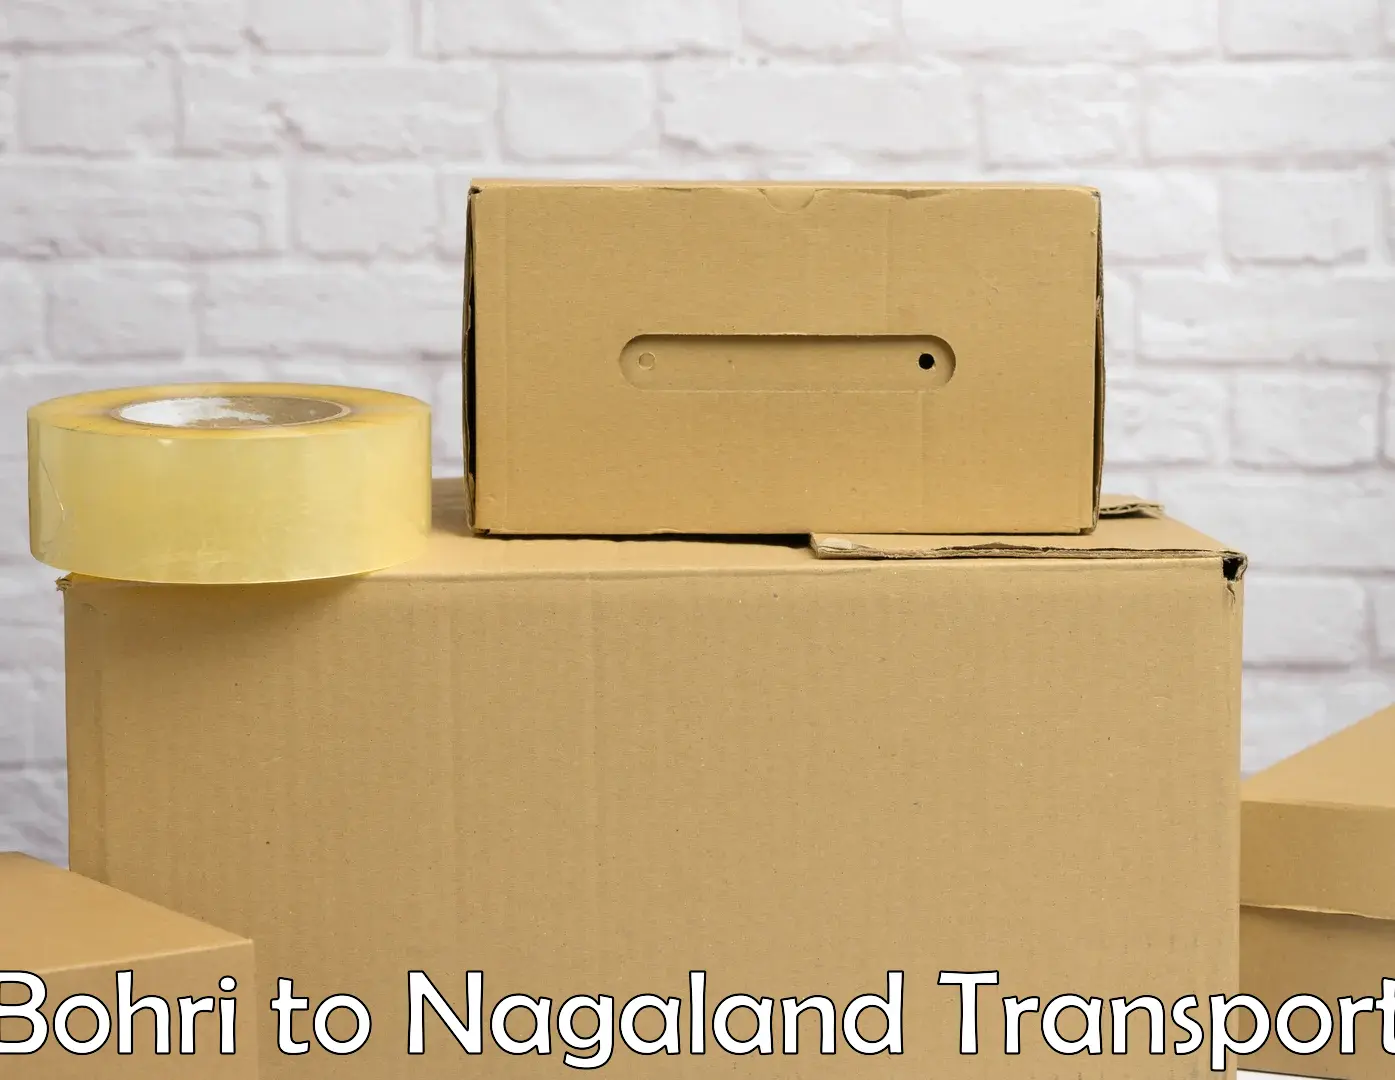 Container transport service Bohri to Nagaland